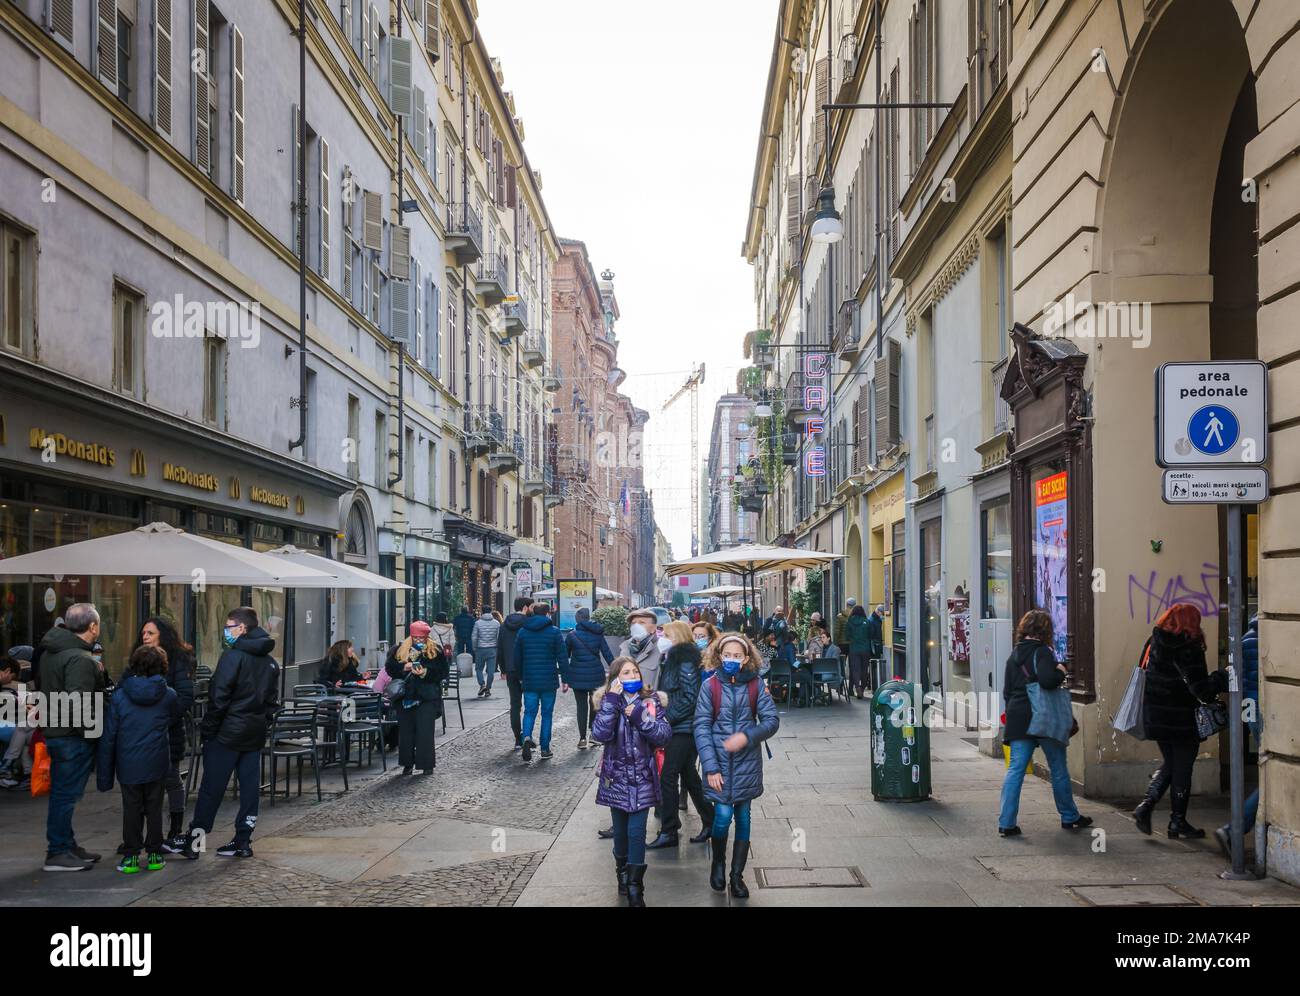 Accademia street in historic centre of Turin. People walk. Turin, Piedmont region in northern Italy, Europe Stock Photo